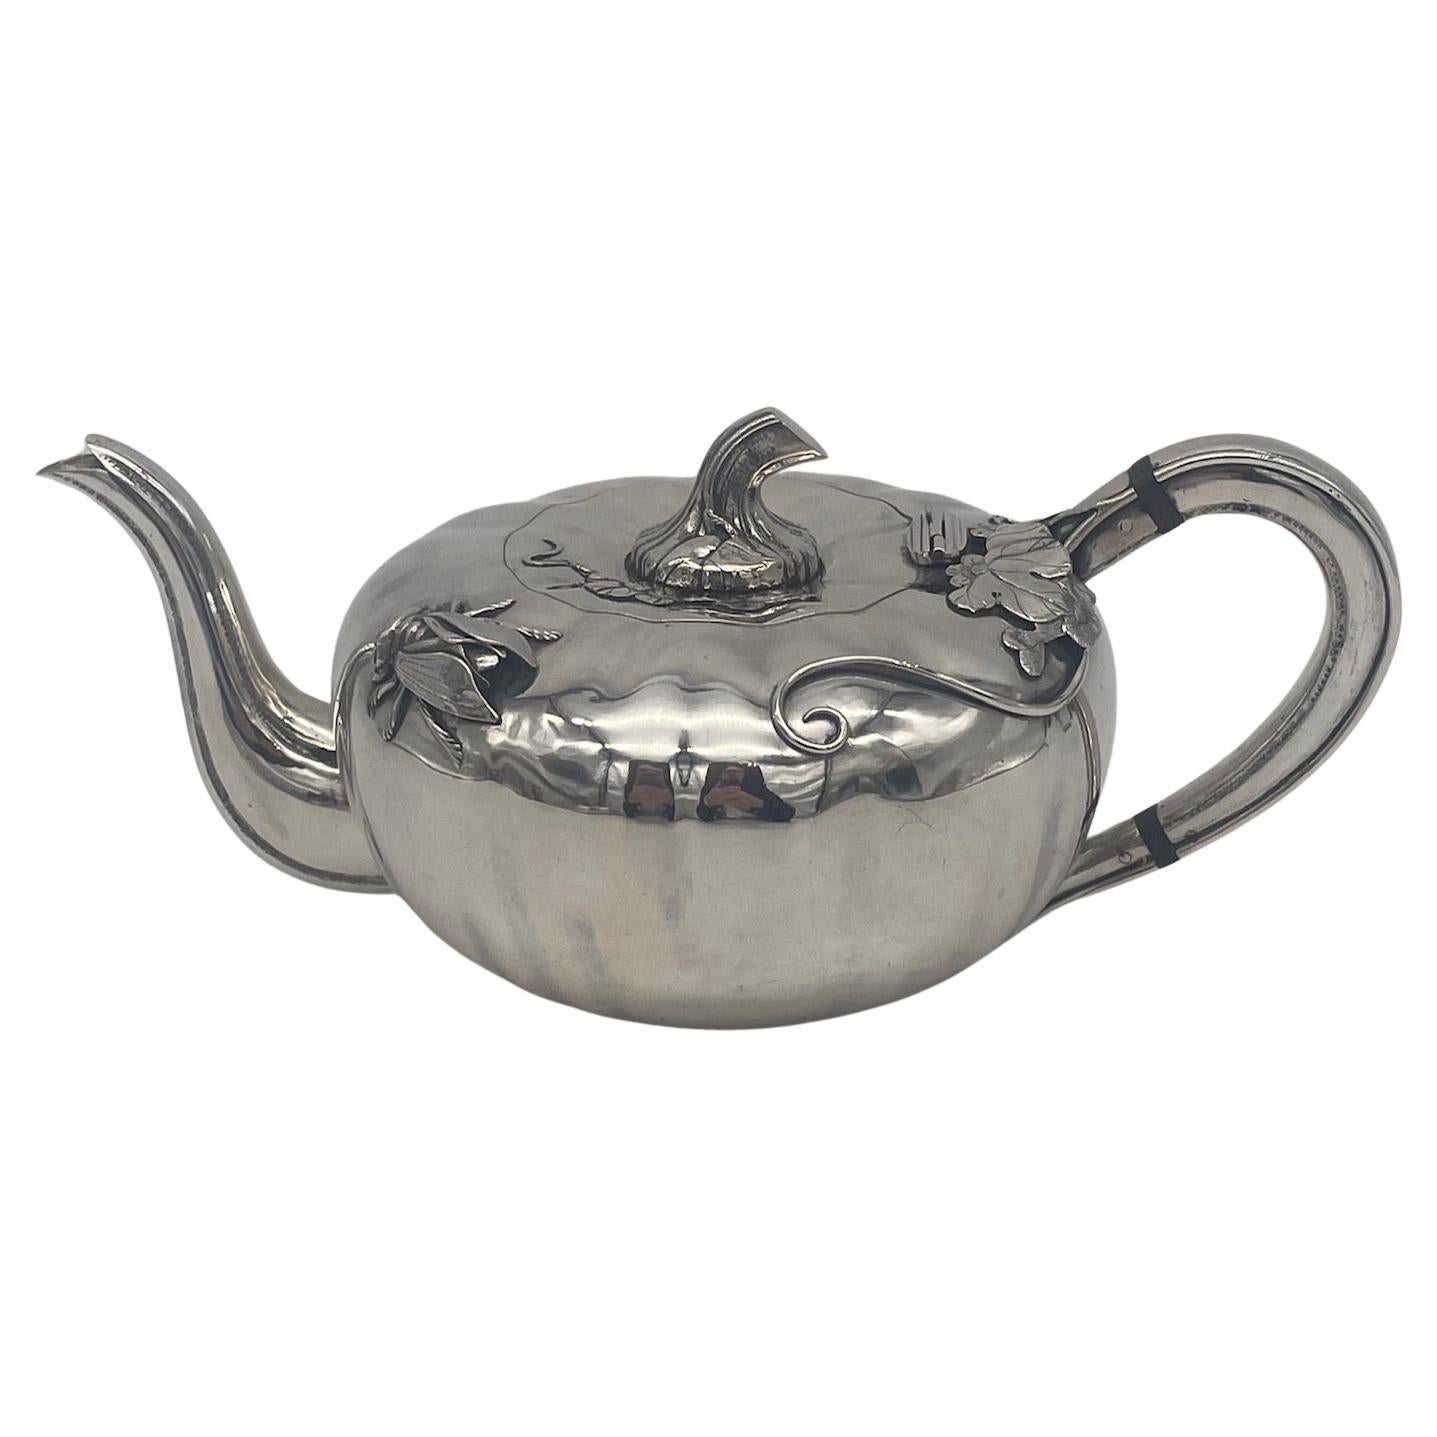 Chinese Export Silver 3-piece Teaset, circa 1920, of pumpkin form, decorated with pumpkin vine and leaves on each piece, and a large impressive cicada on the teapot. The finial on the hinged lid of the teapot and also the pull-off lid on the sugar